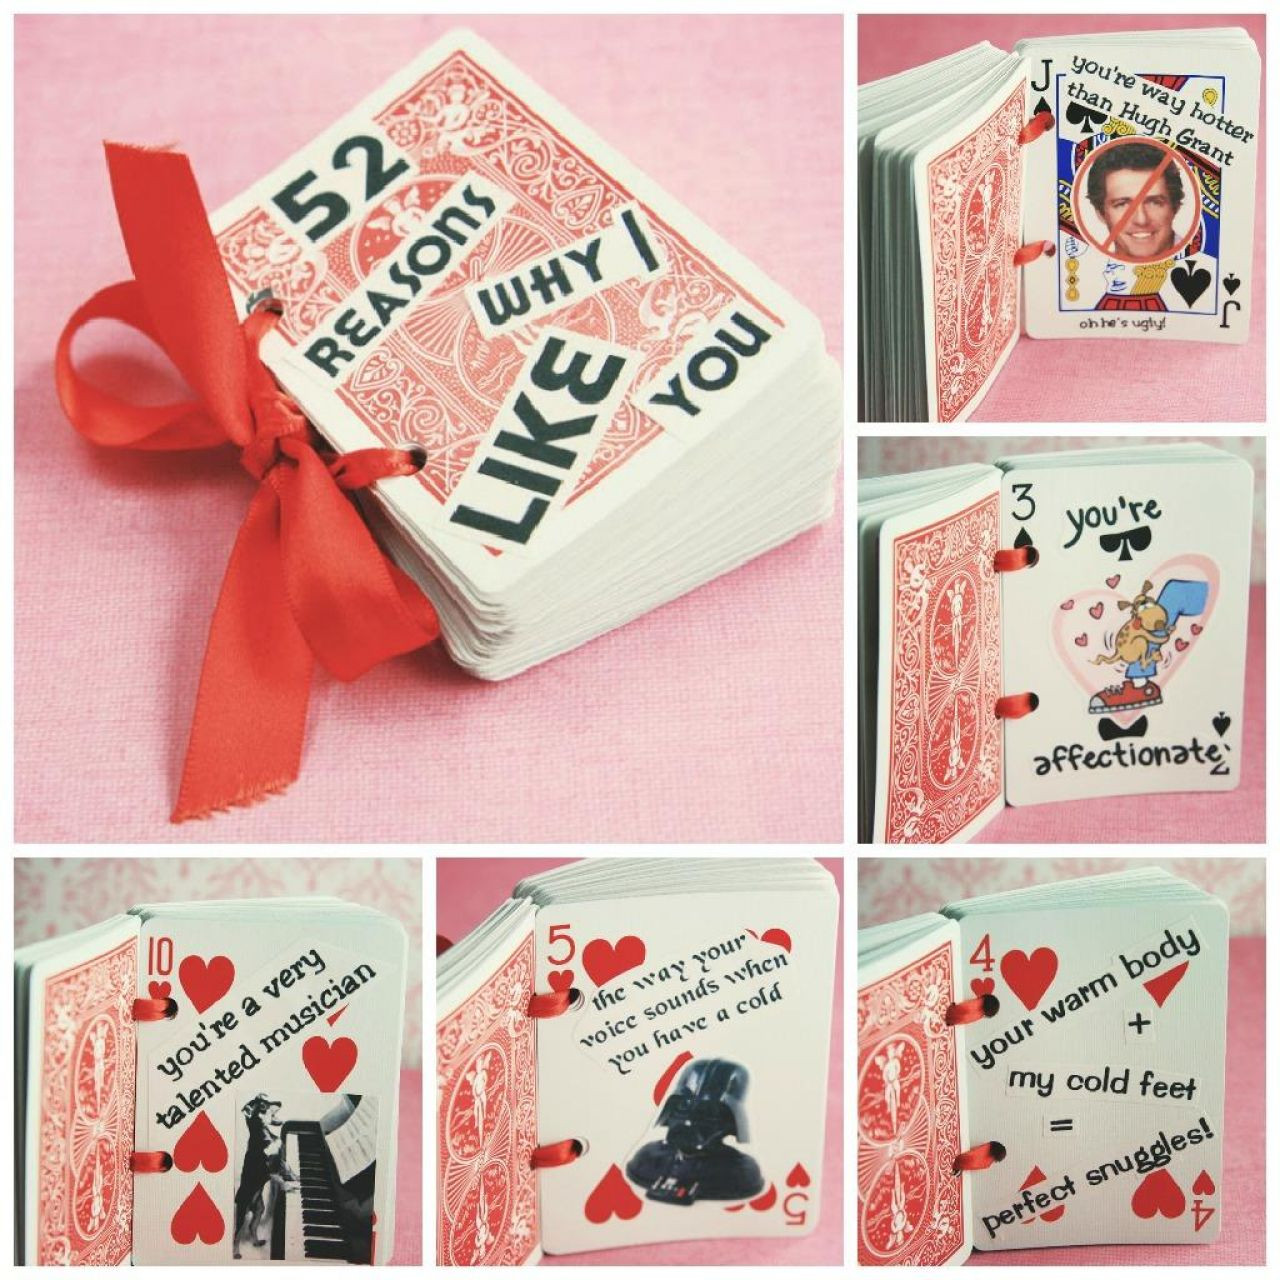 Valentines Day Gifts For Him Pinterest
 17 Last Minute Handmade Valentine Gifts for Him